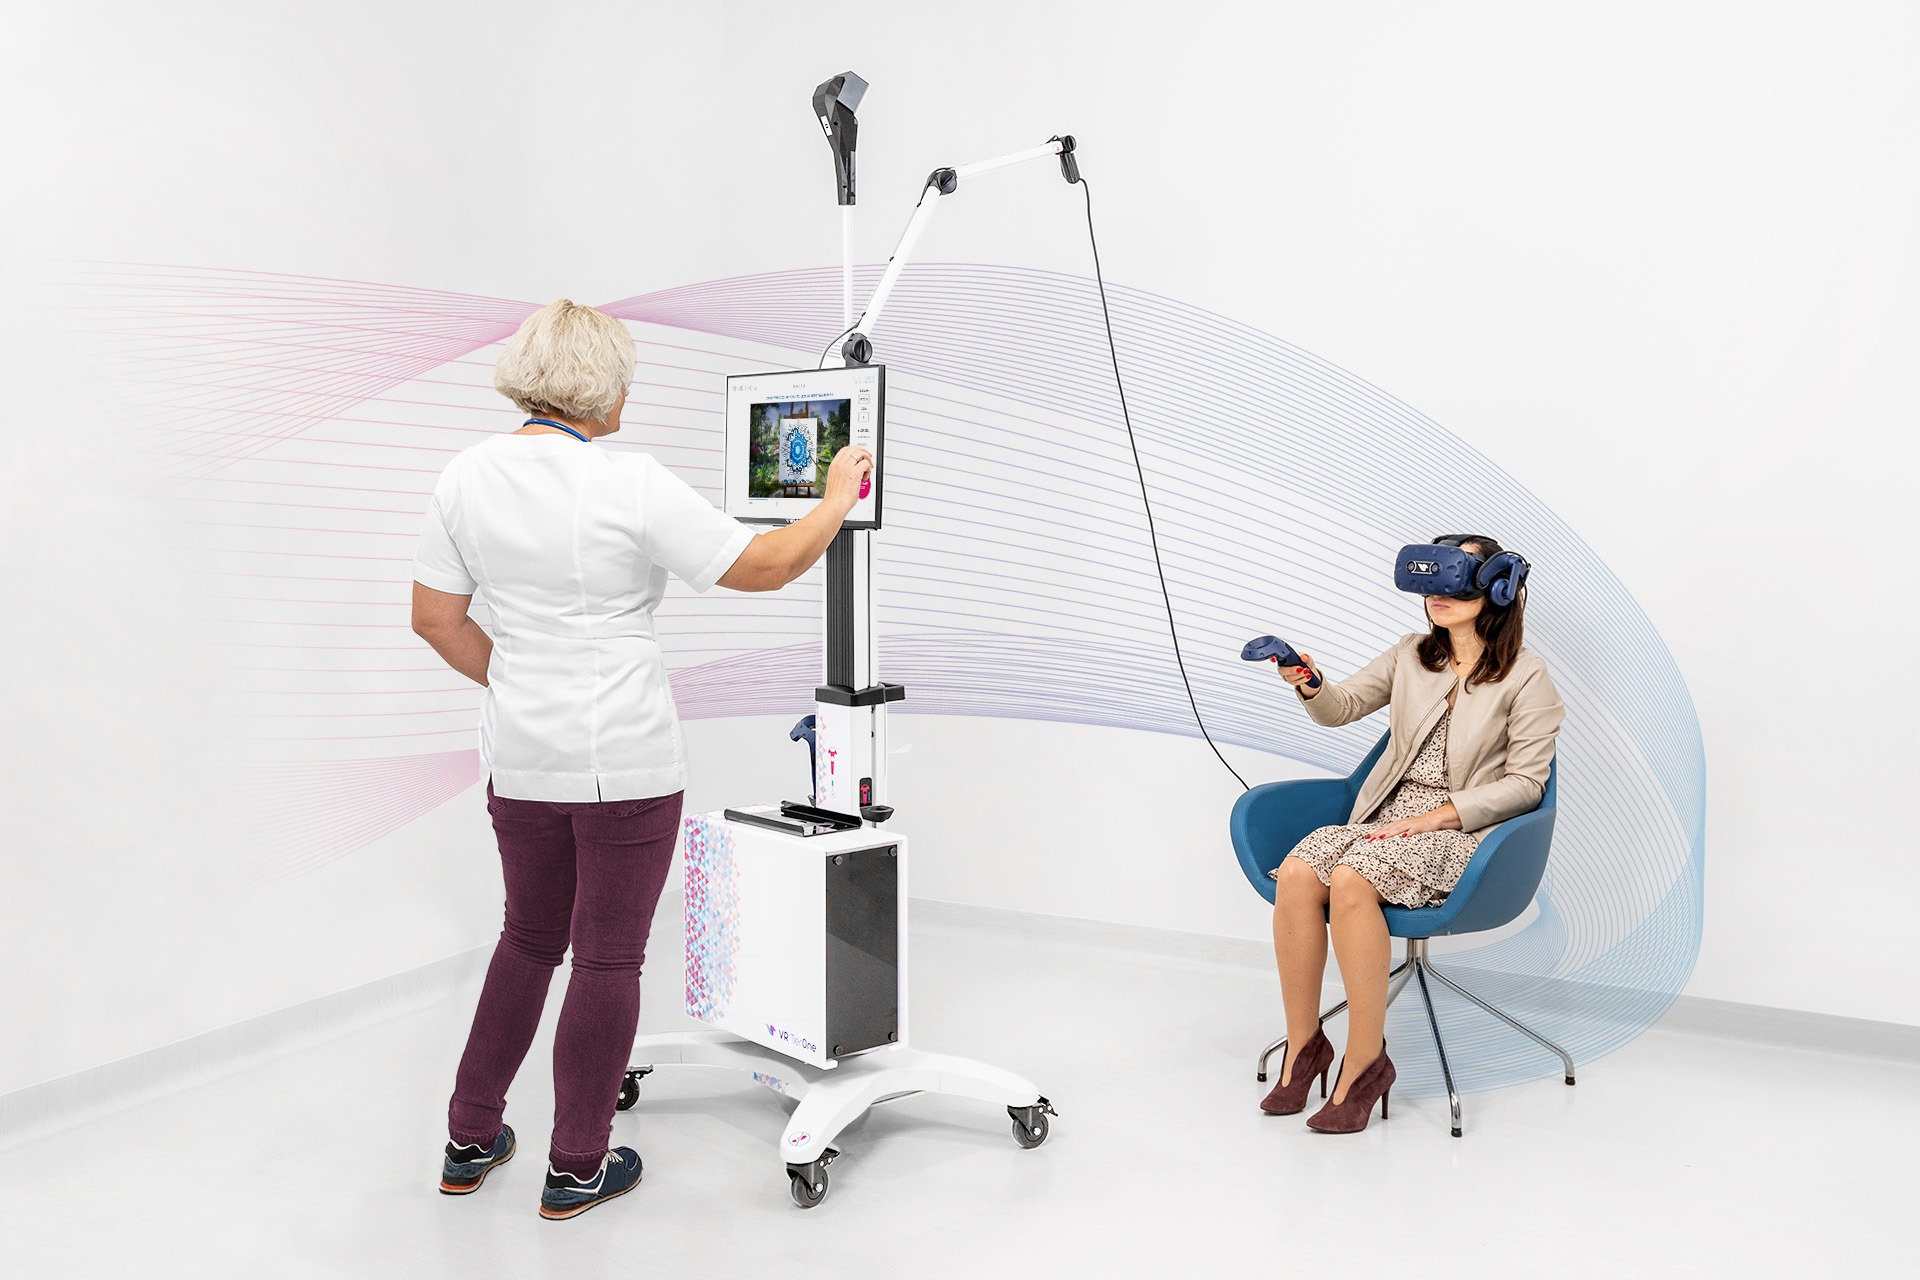 How to increase the effectiveness of rehabilitation with use of VR TierOne?